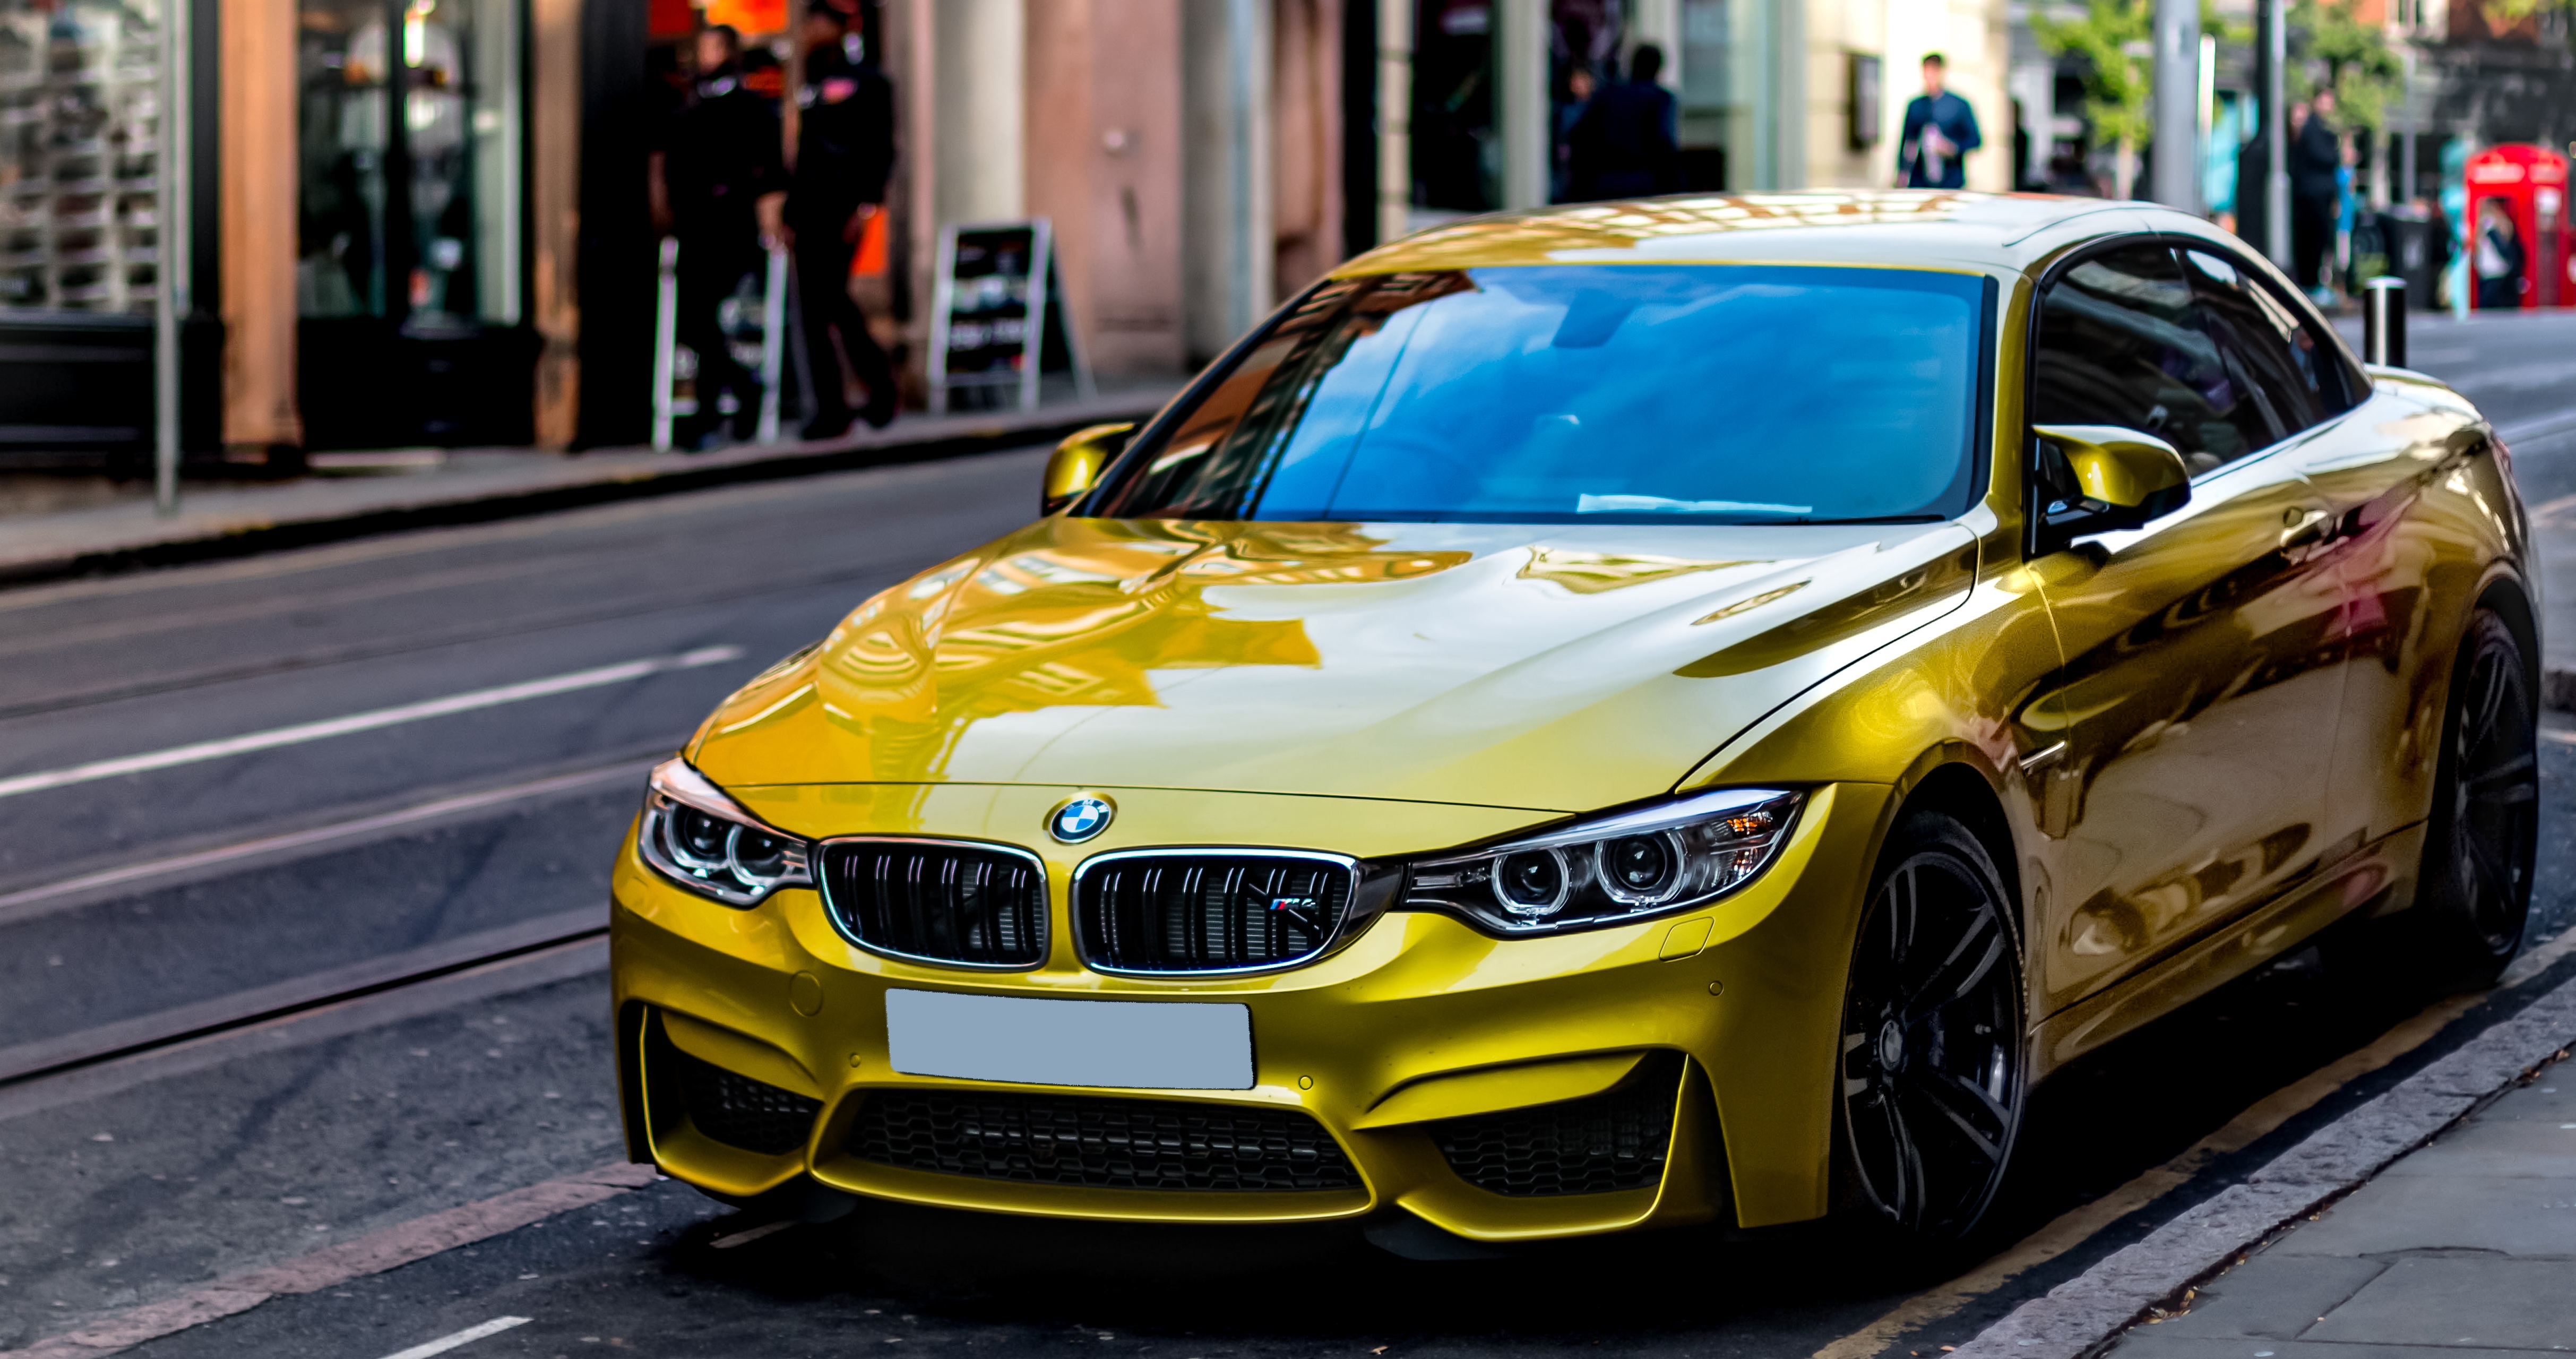 cars, auto, yellow, side view, style